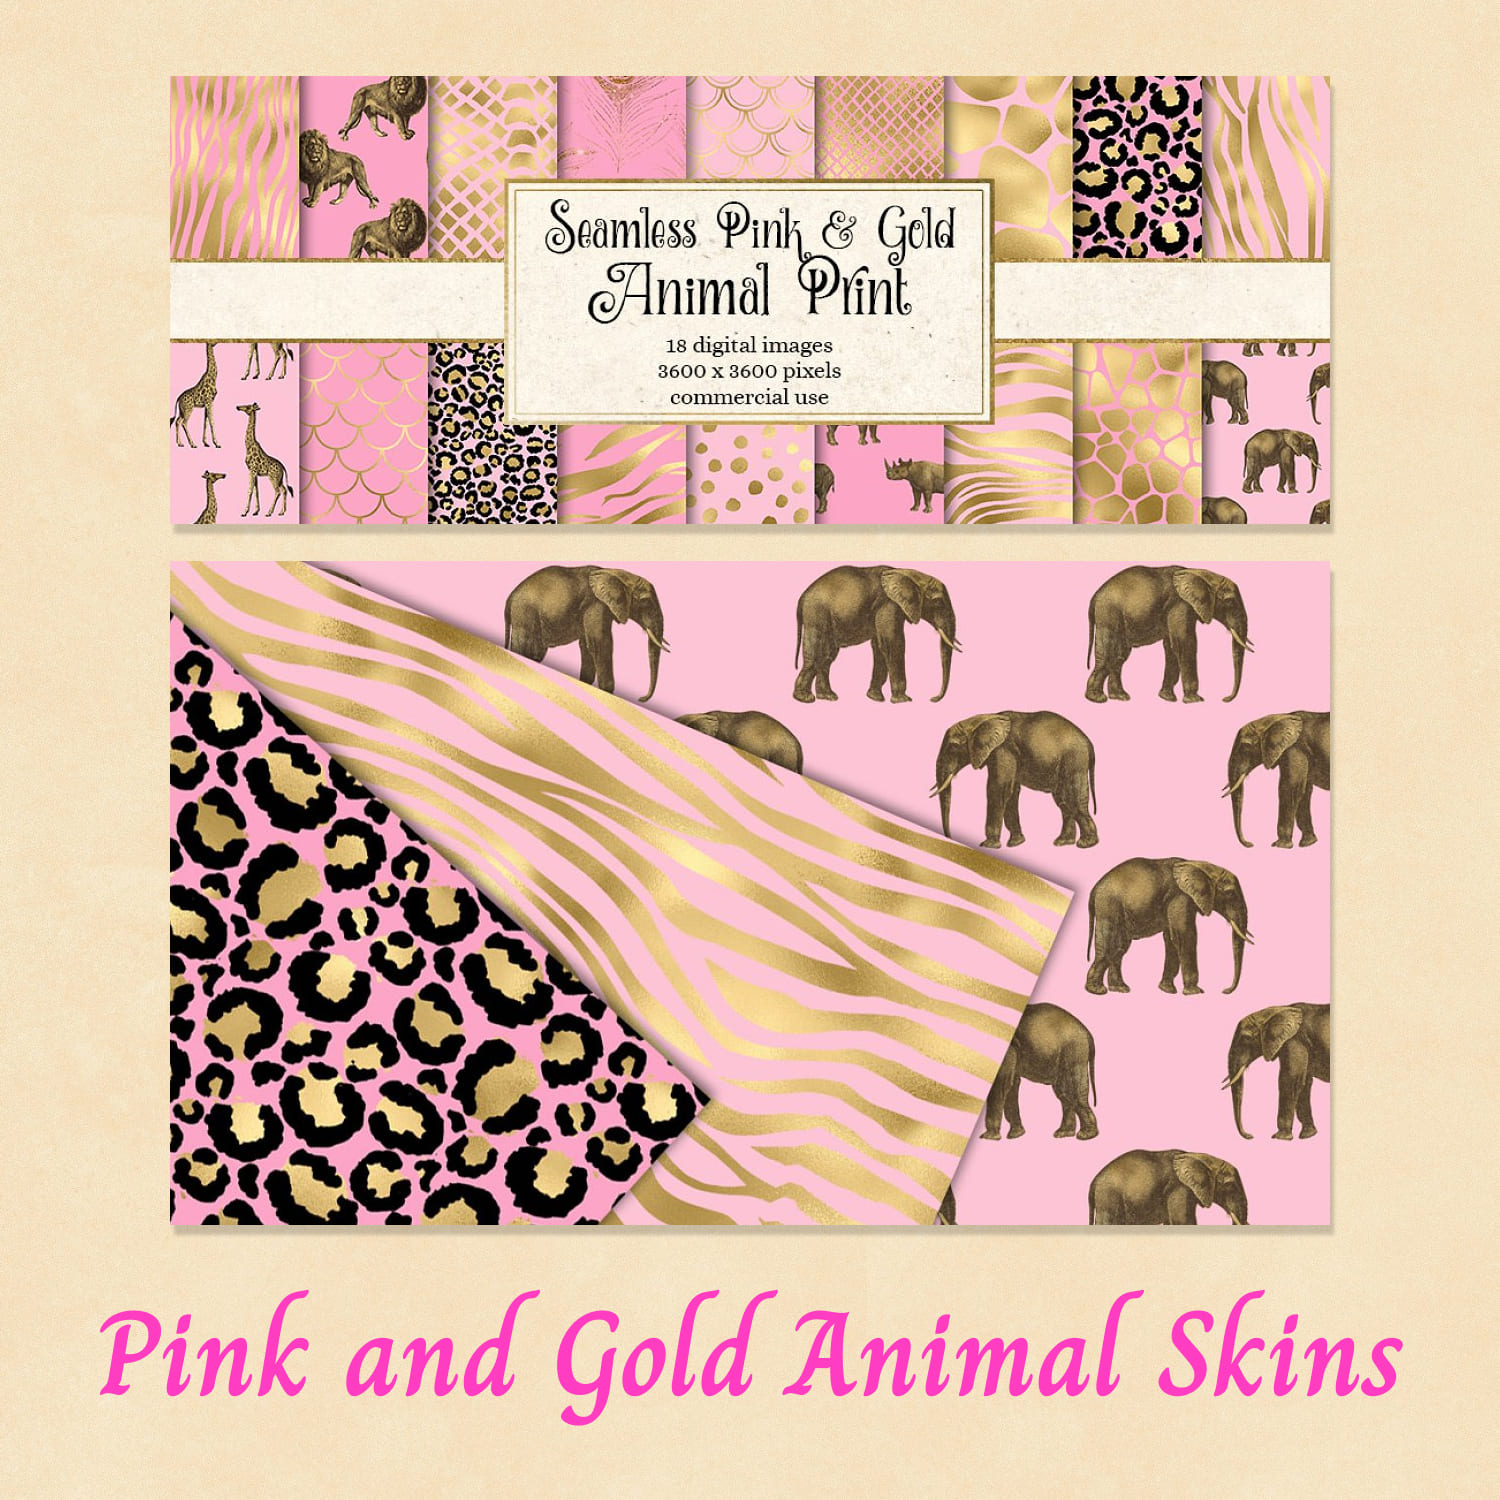 Pink and Gold Animal Skins main cover.